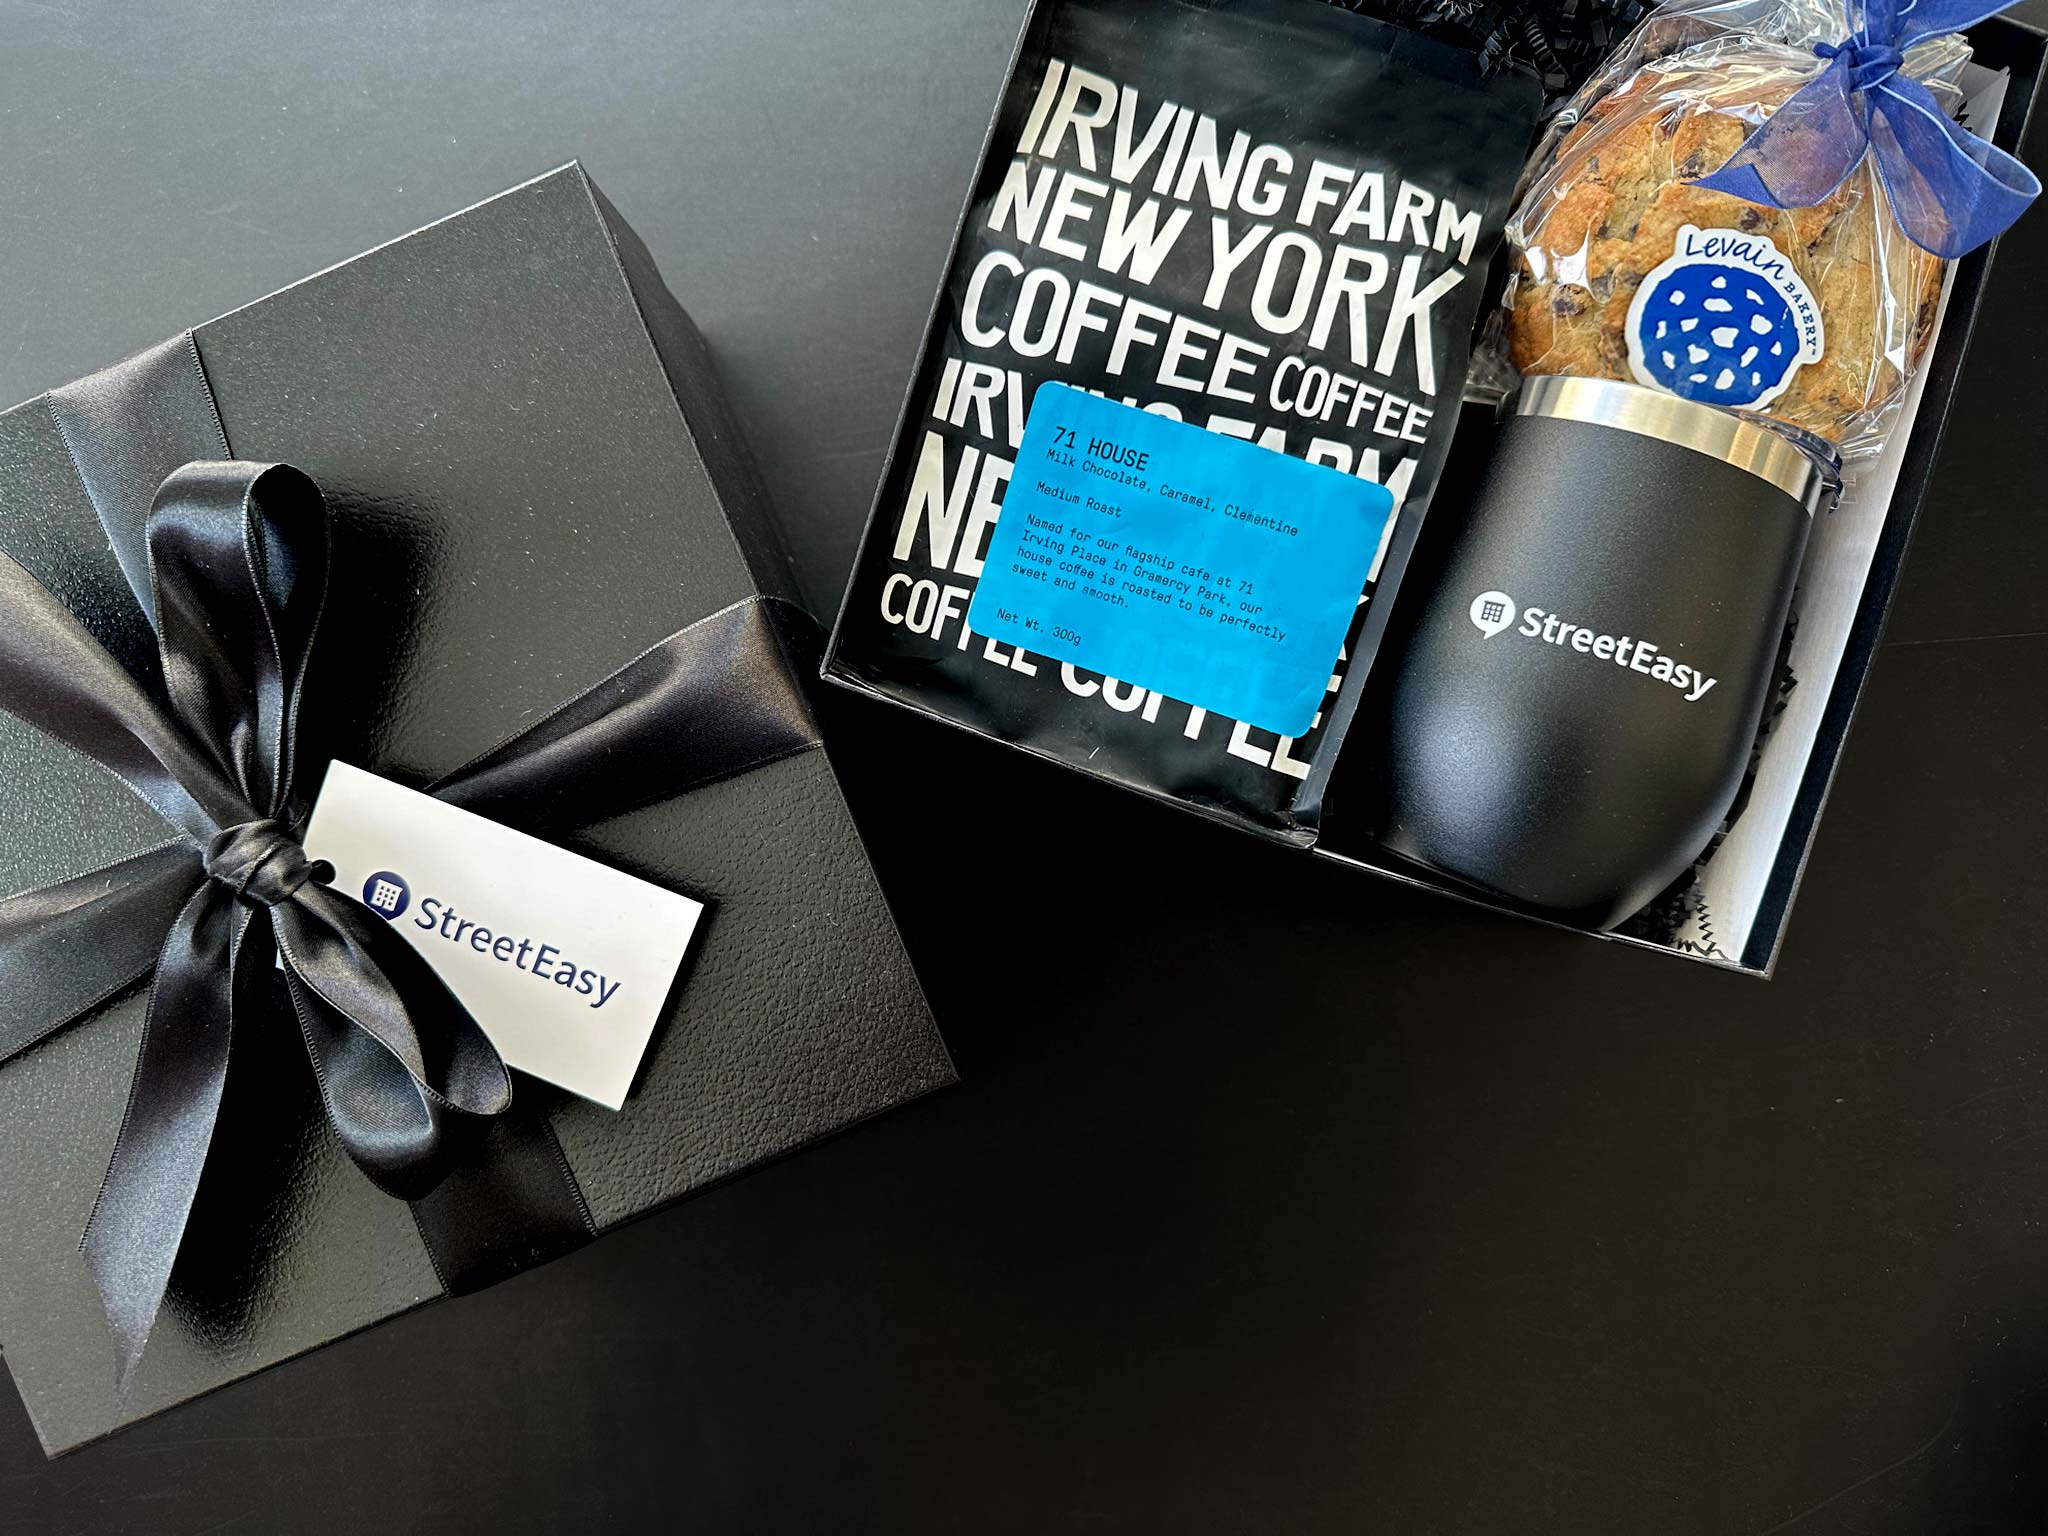 street easy customized corporate gift box with black box, branded mug, coffee and levain bakery cookies